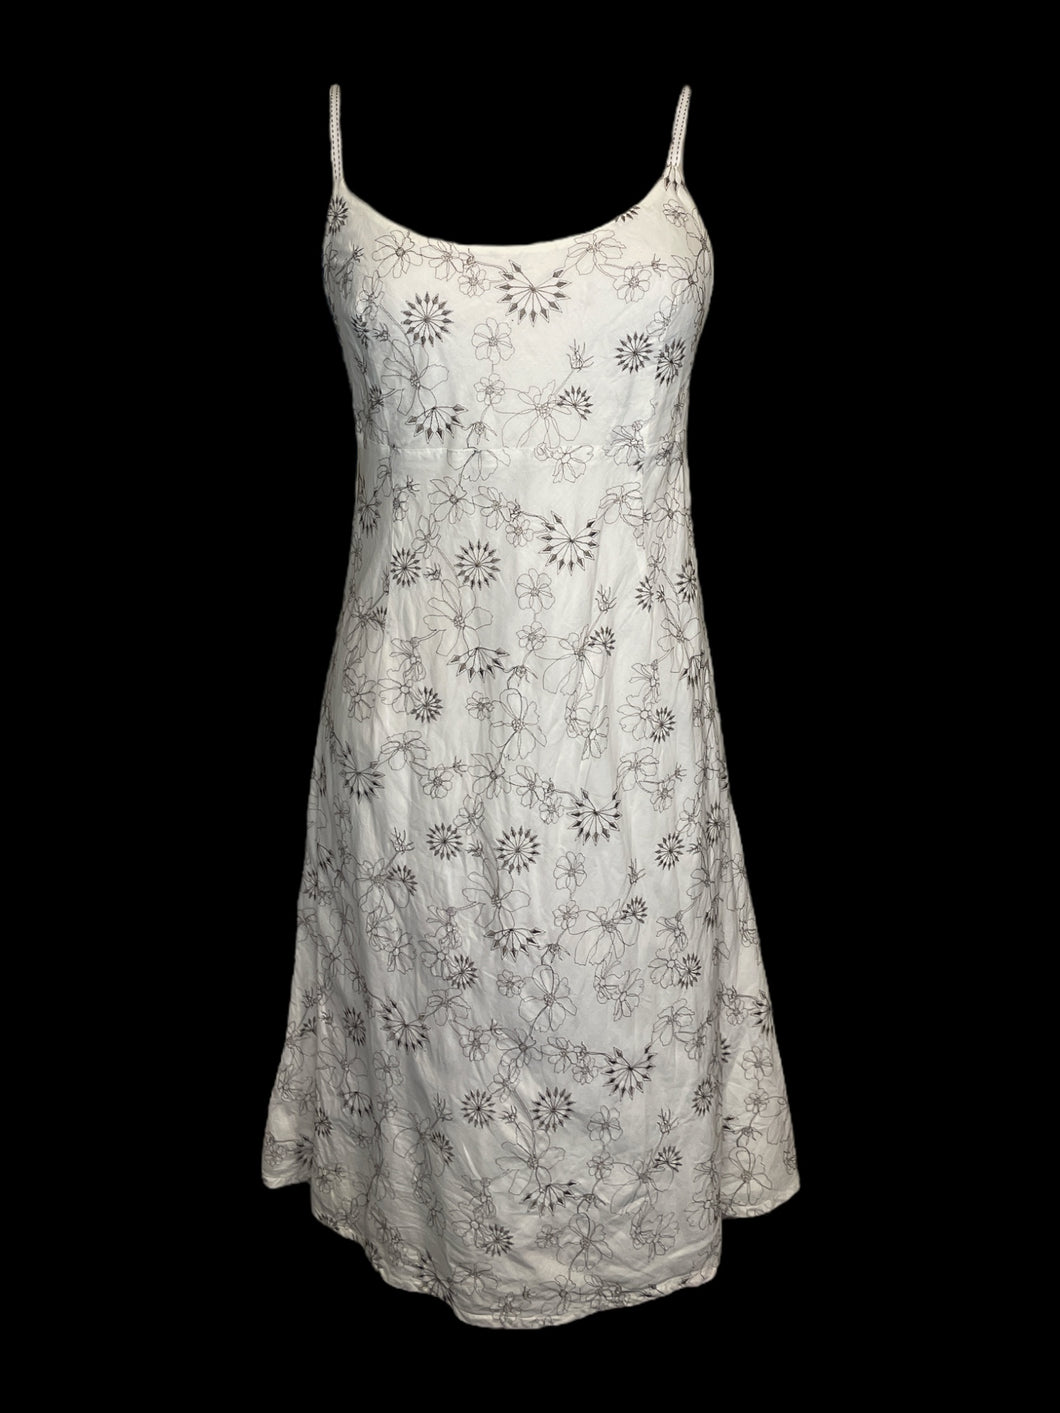 S Off-white & brown floral embroidery sleeveless cotton dress w/ button adjustable straps, & button/zipper closure